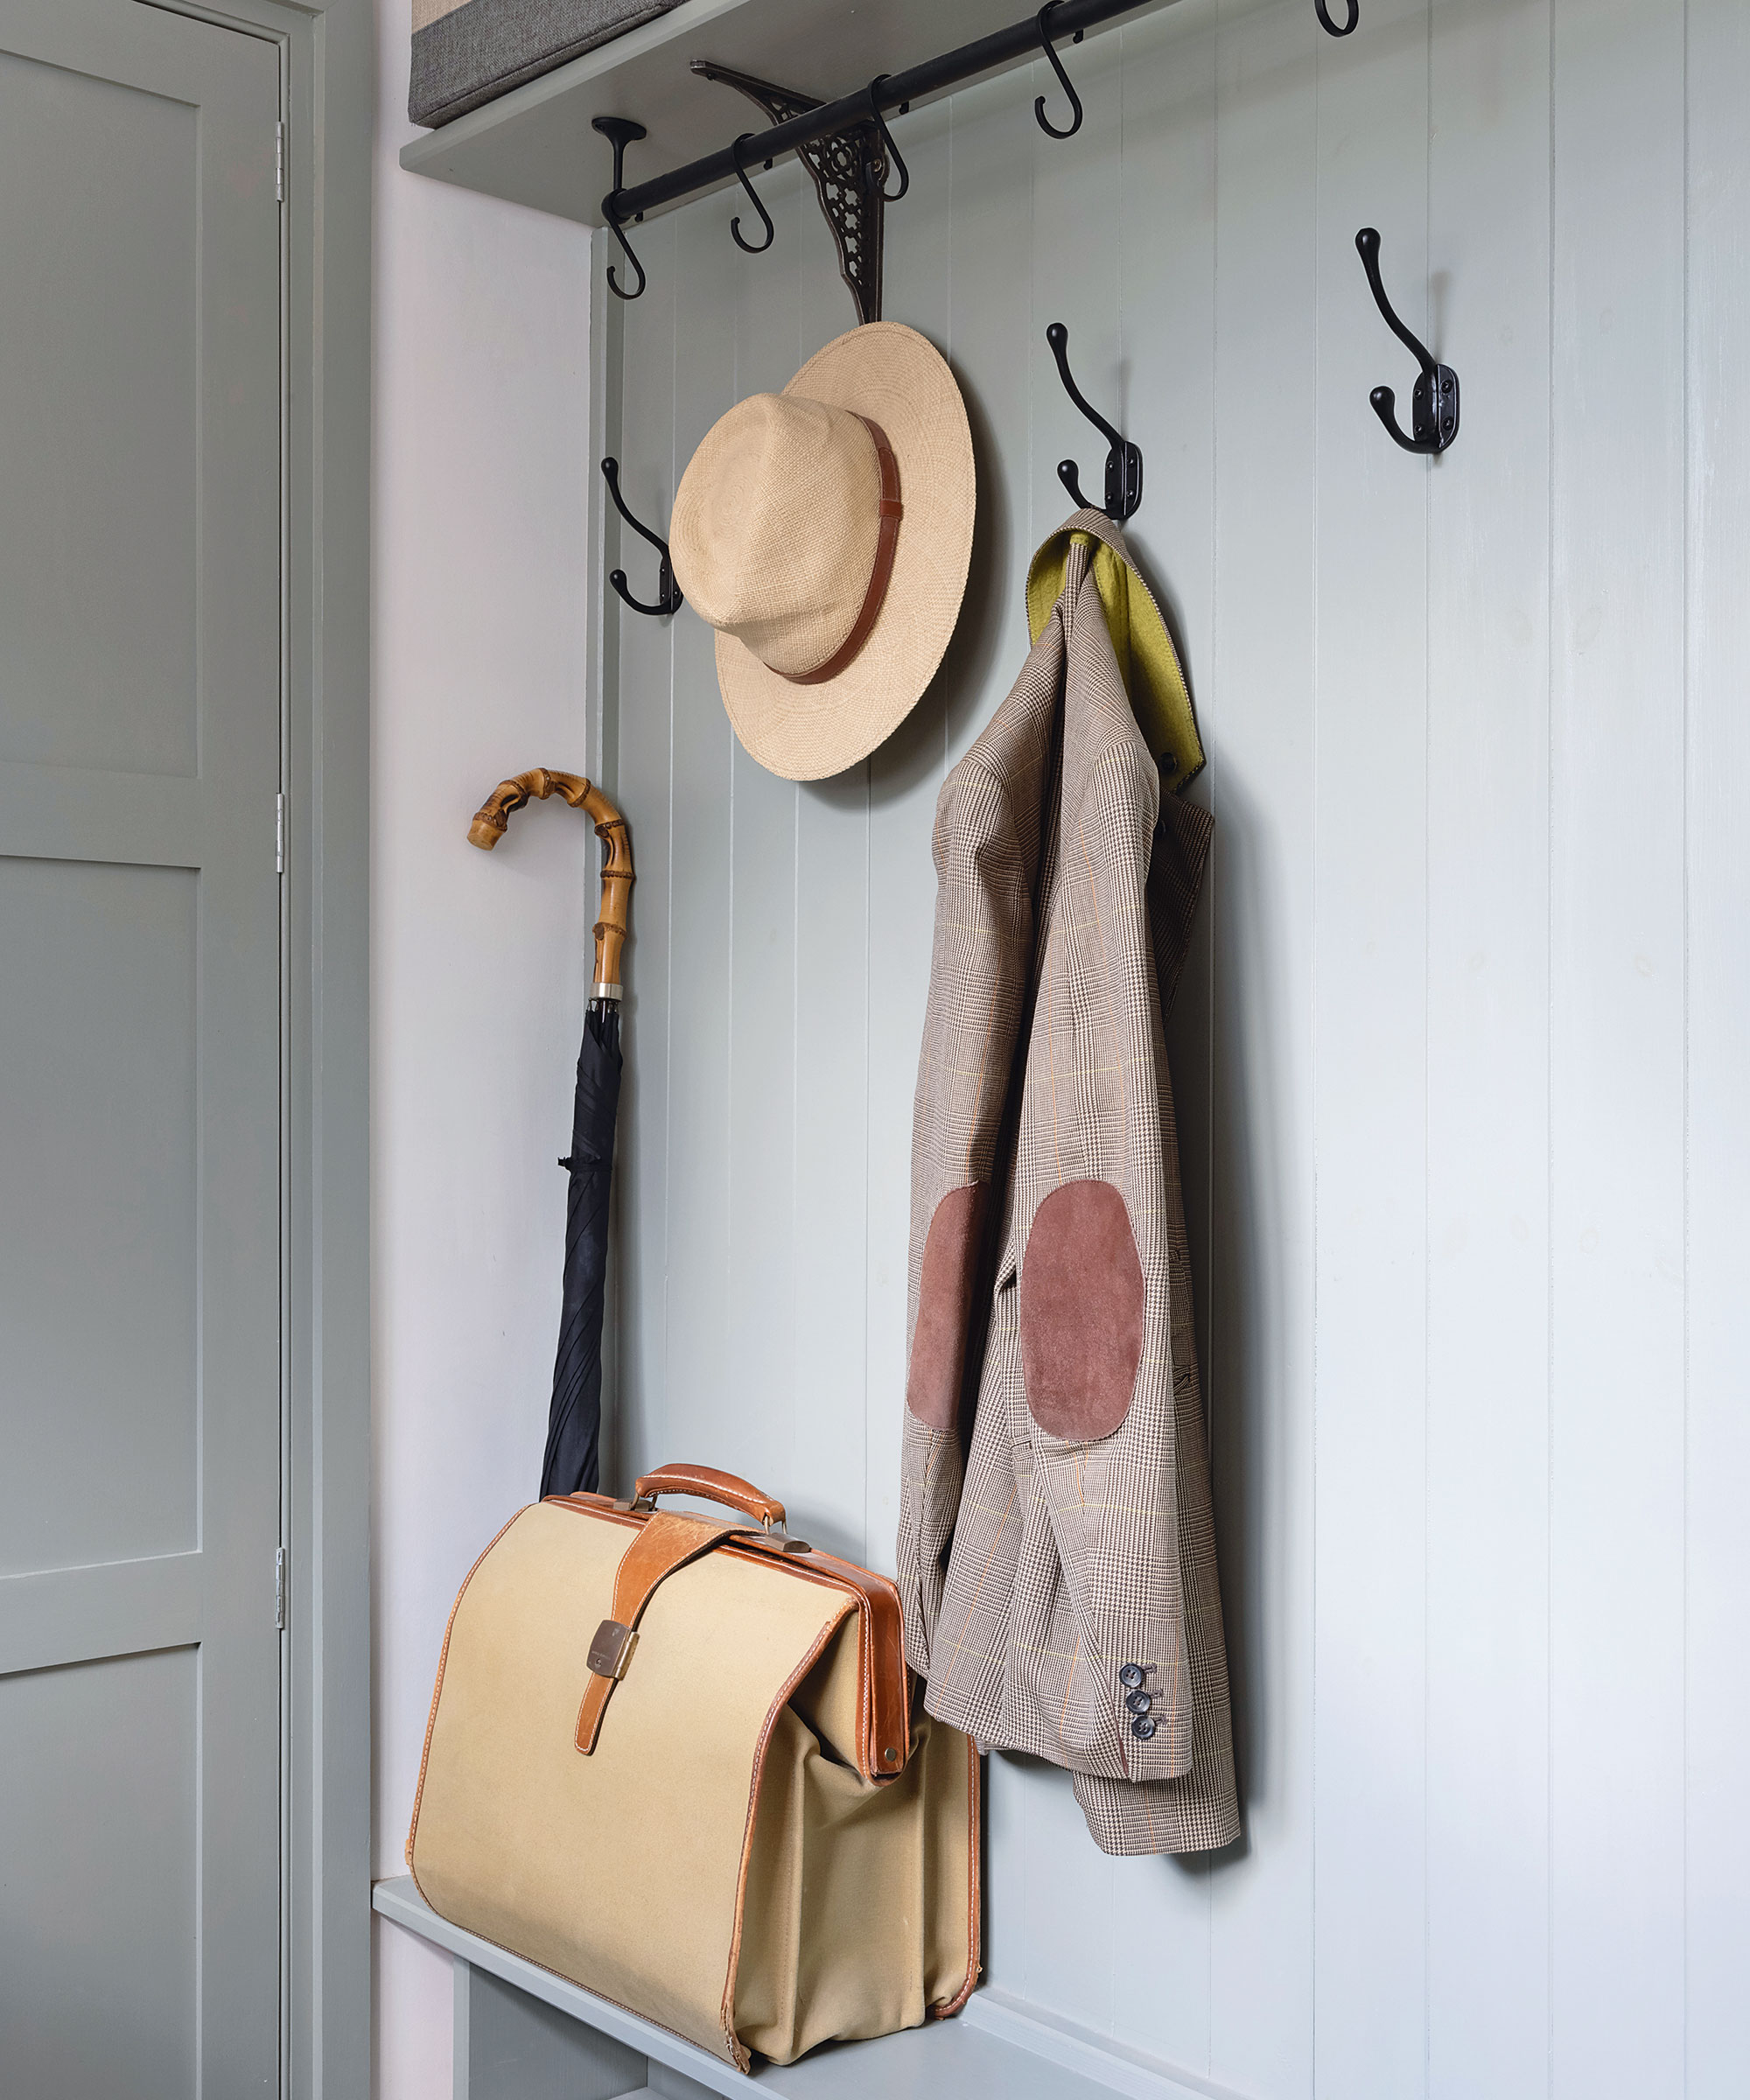 Coat rack and bench in utility room